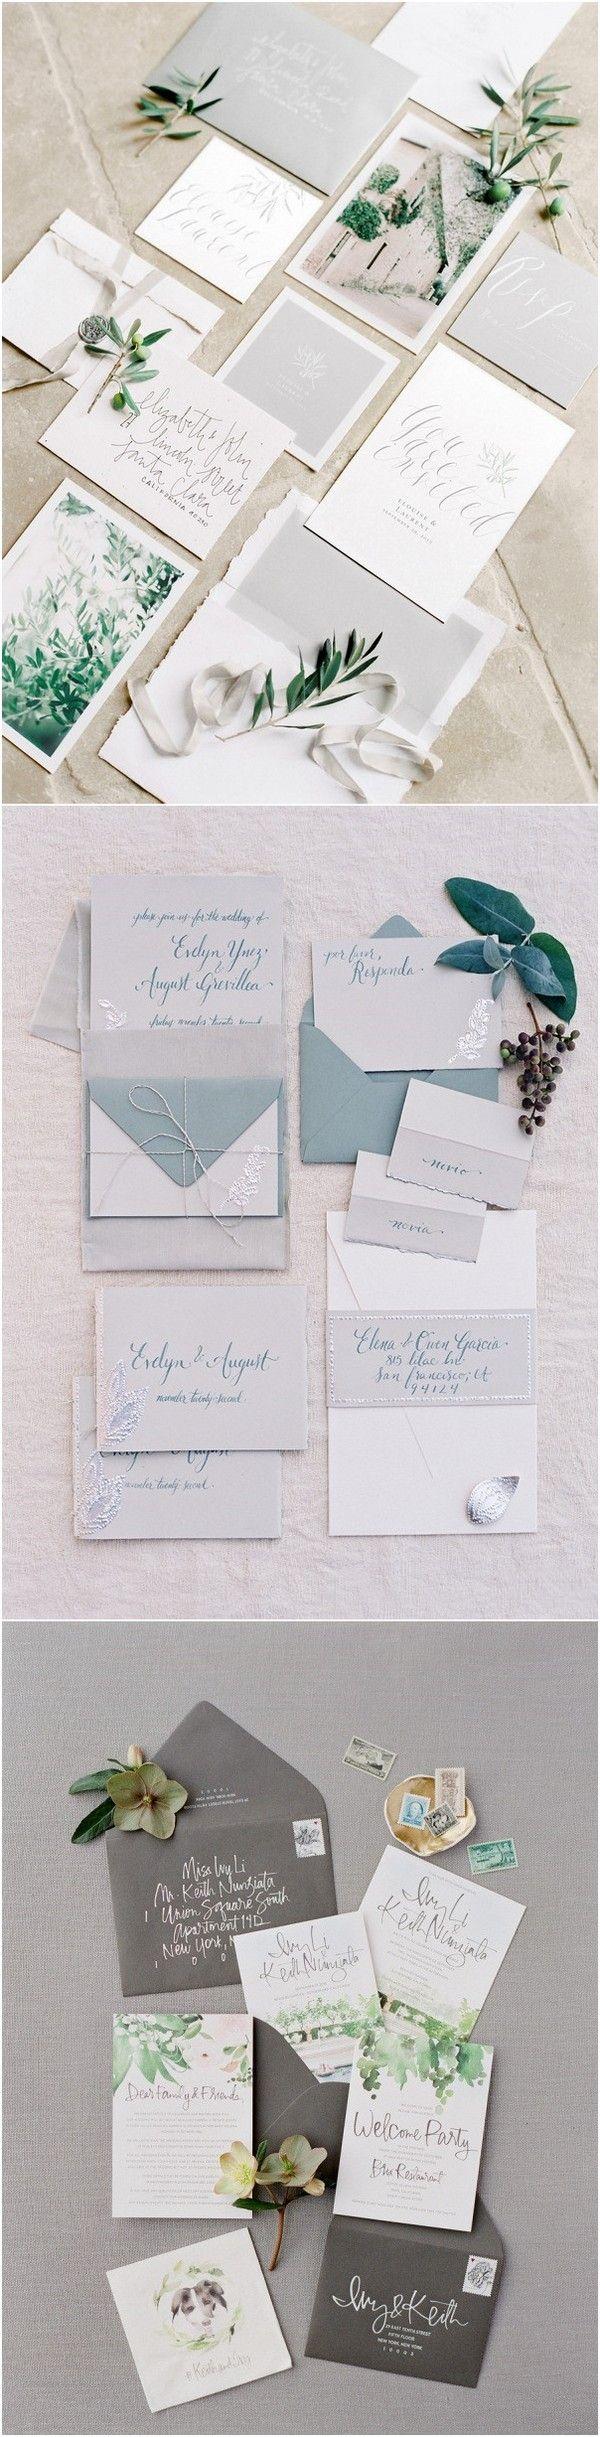 Wedding - Trending-21 Elegant Green And Grey Wedding Color Ideas For 2018 - Page 2 Of 4